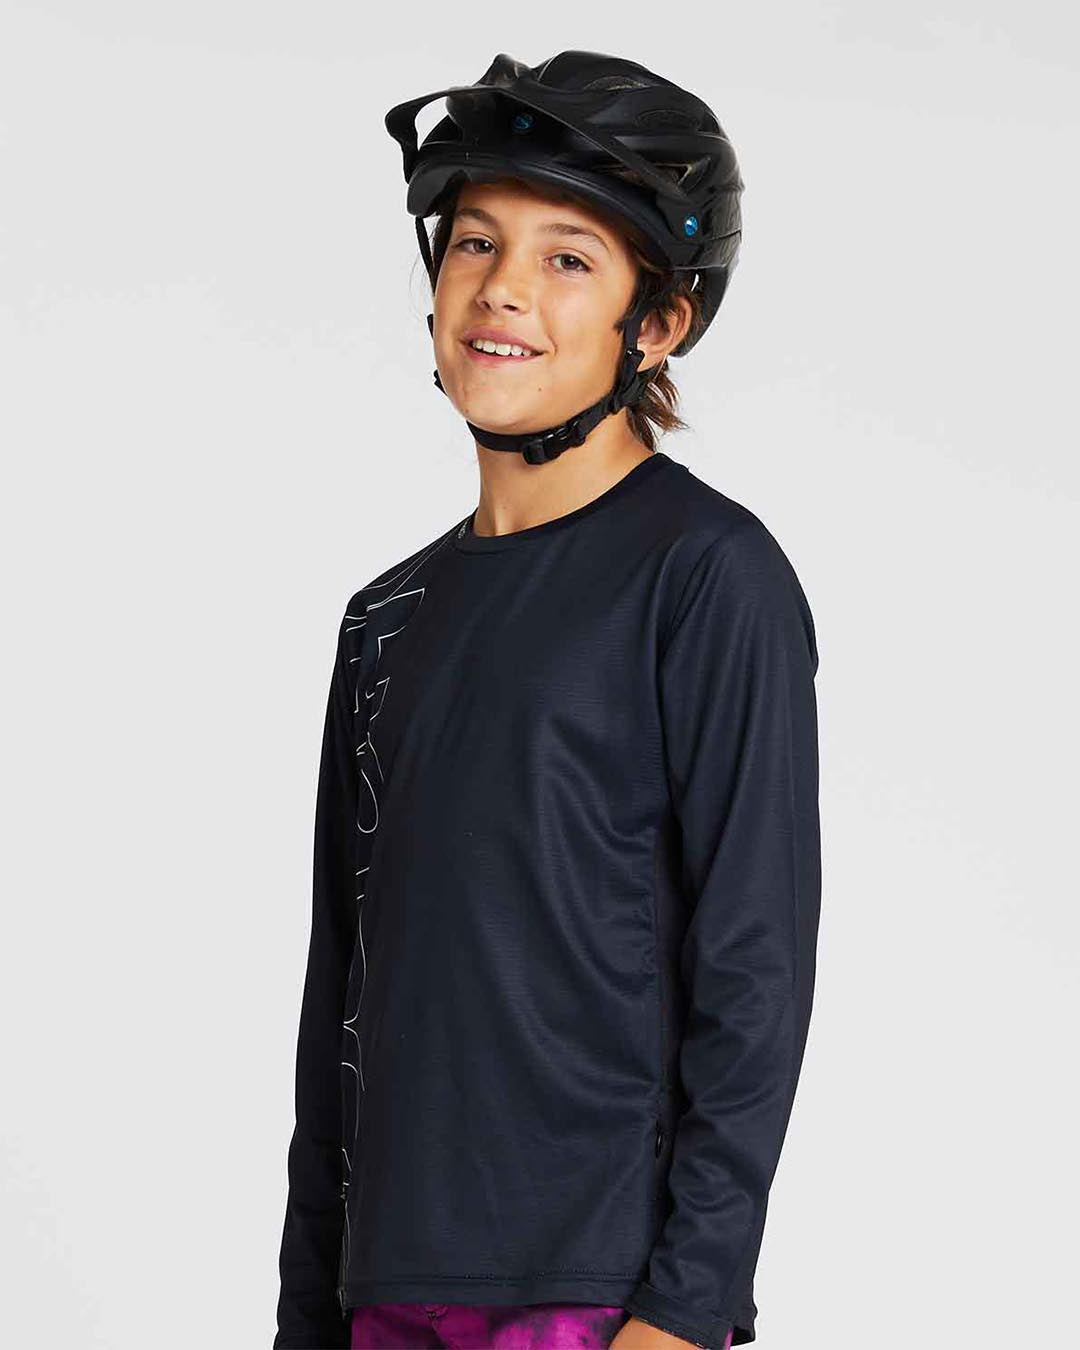 Youth Gravity Jersey | Stealth